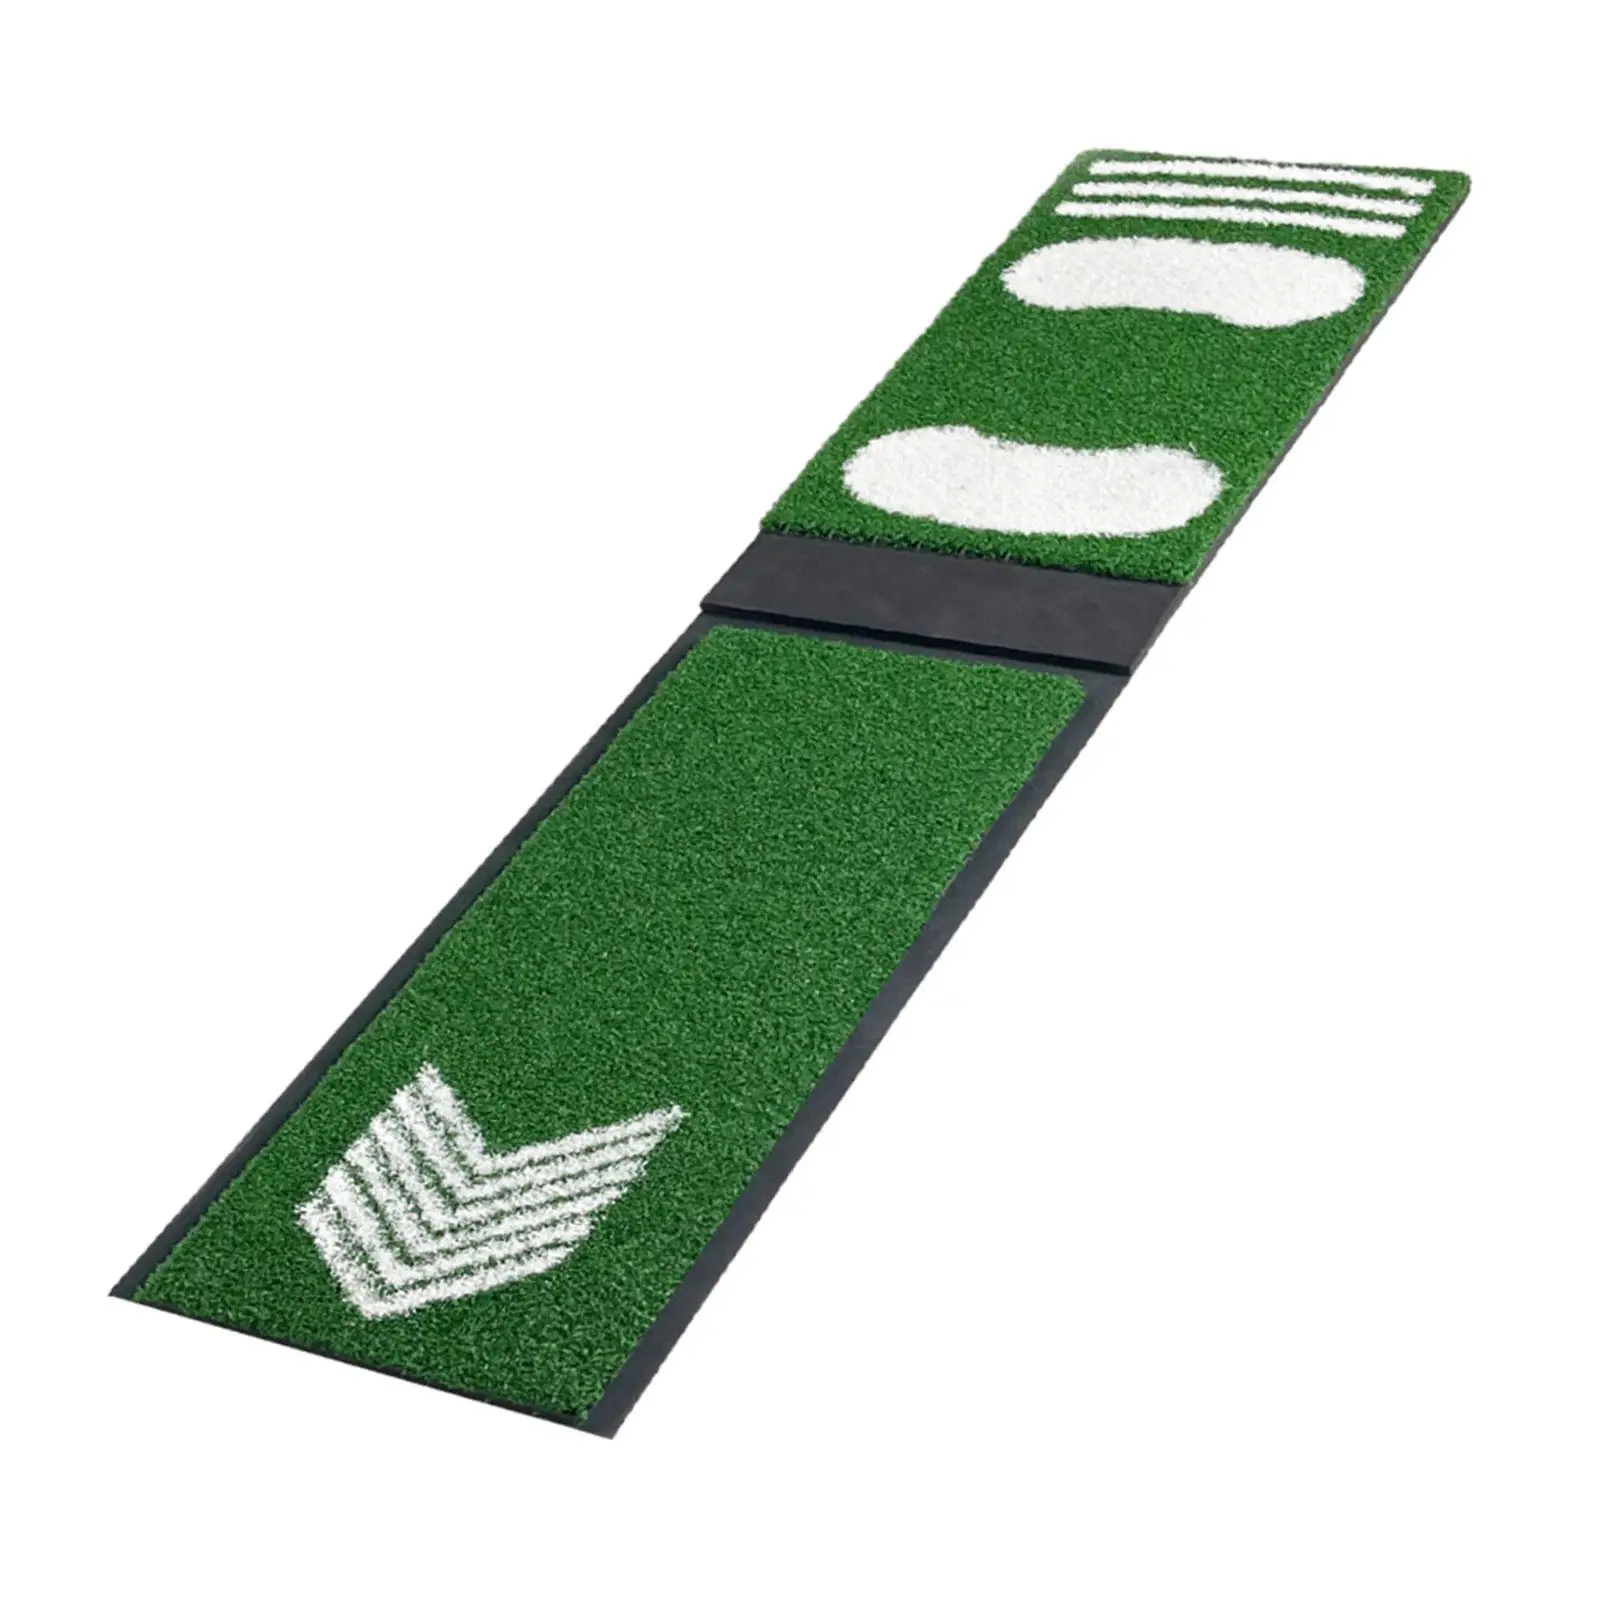 Softball Pitching Mat Antifade Portable Regulation AntiSlip Rubber Baseball Pitchers Mound for Indoor Outdoor Pitching Practice